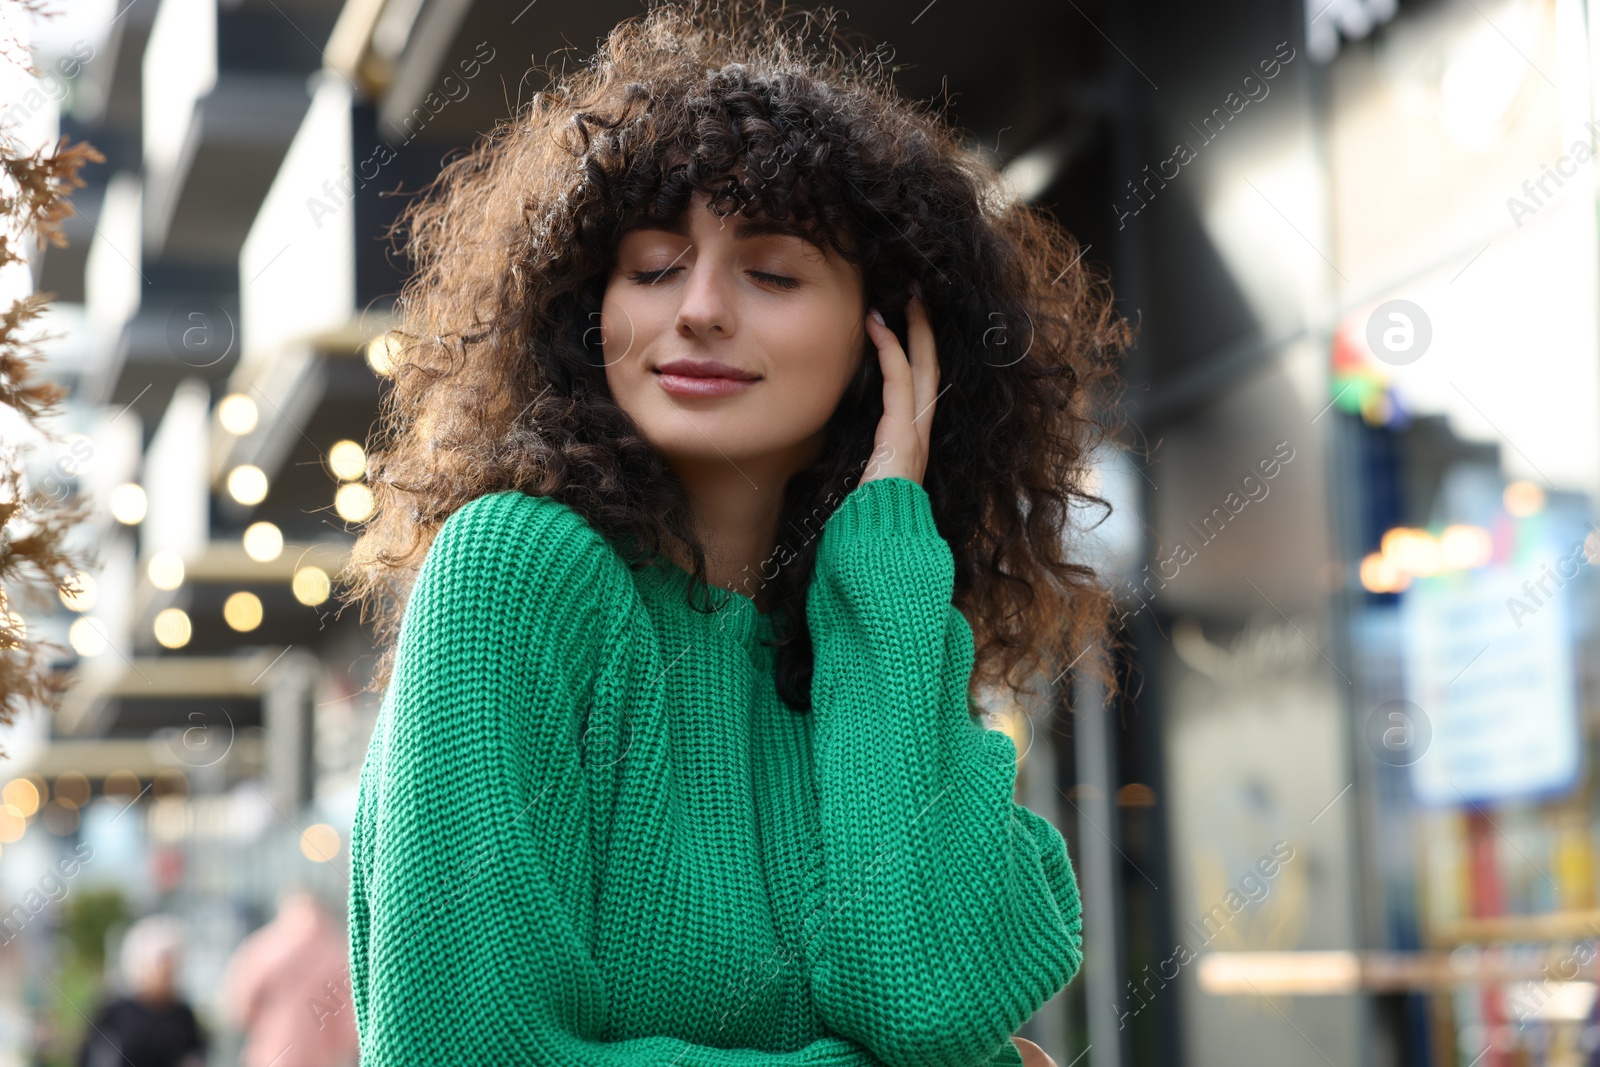 Photo of Young woman in stylish green sweater outdoors